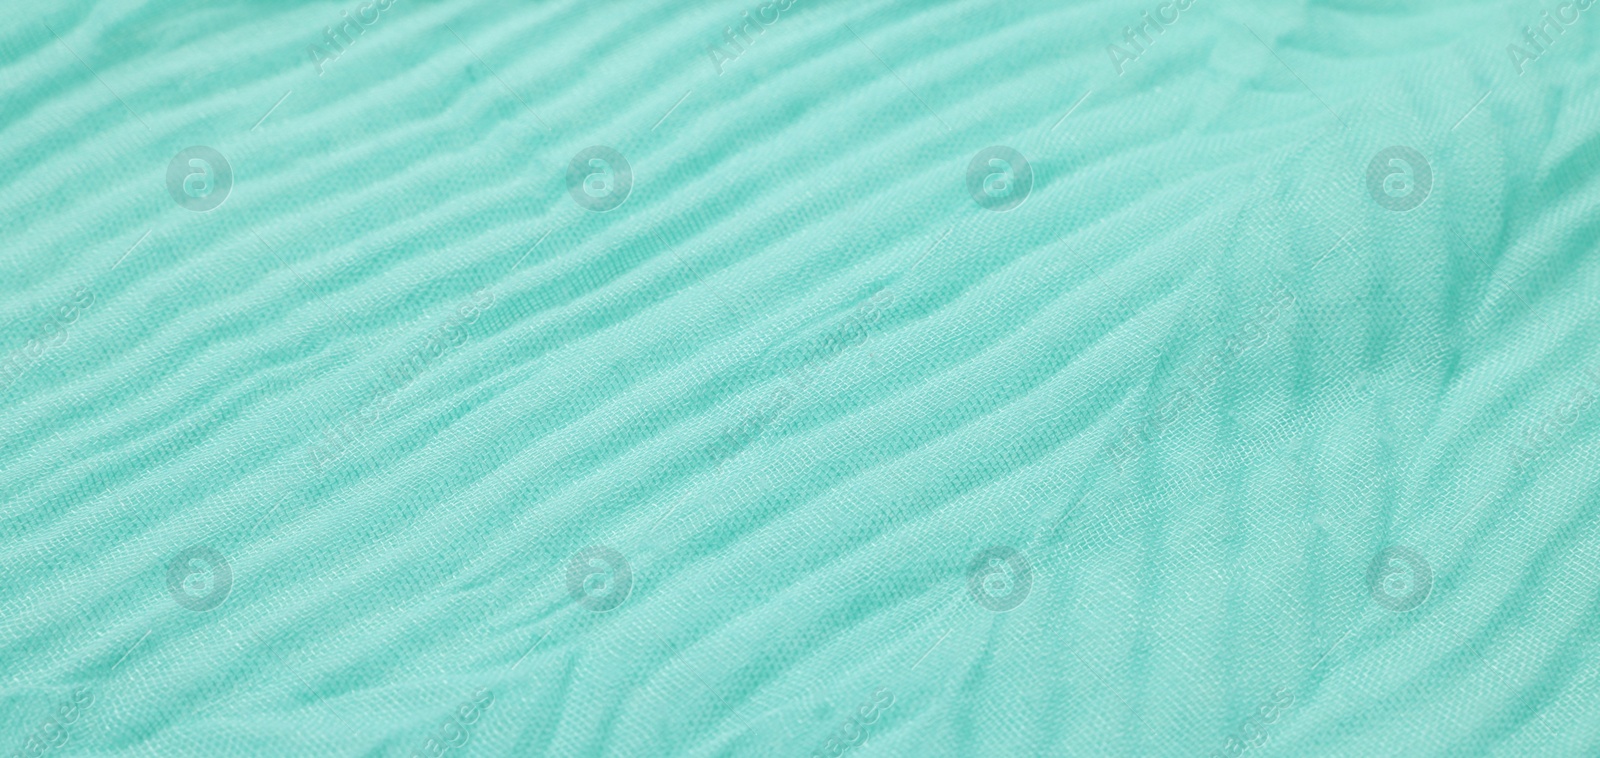 Photo of Texture of turquoise crumpled fabric as background, closeup